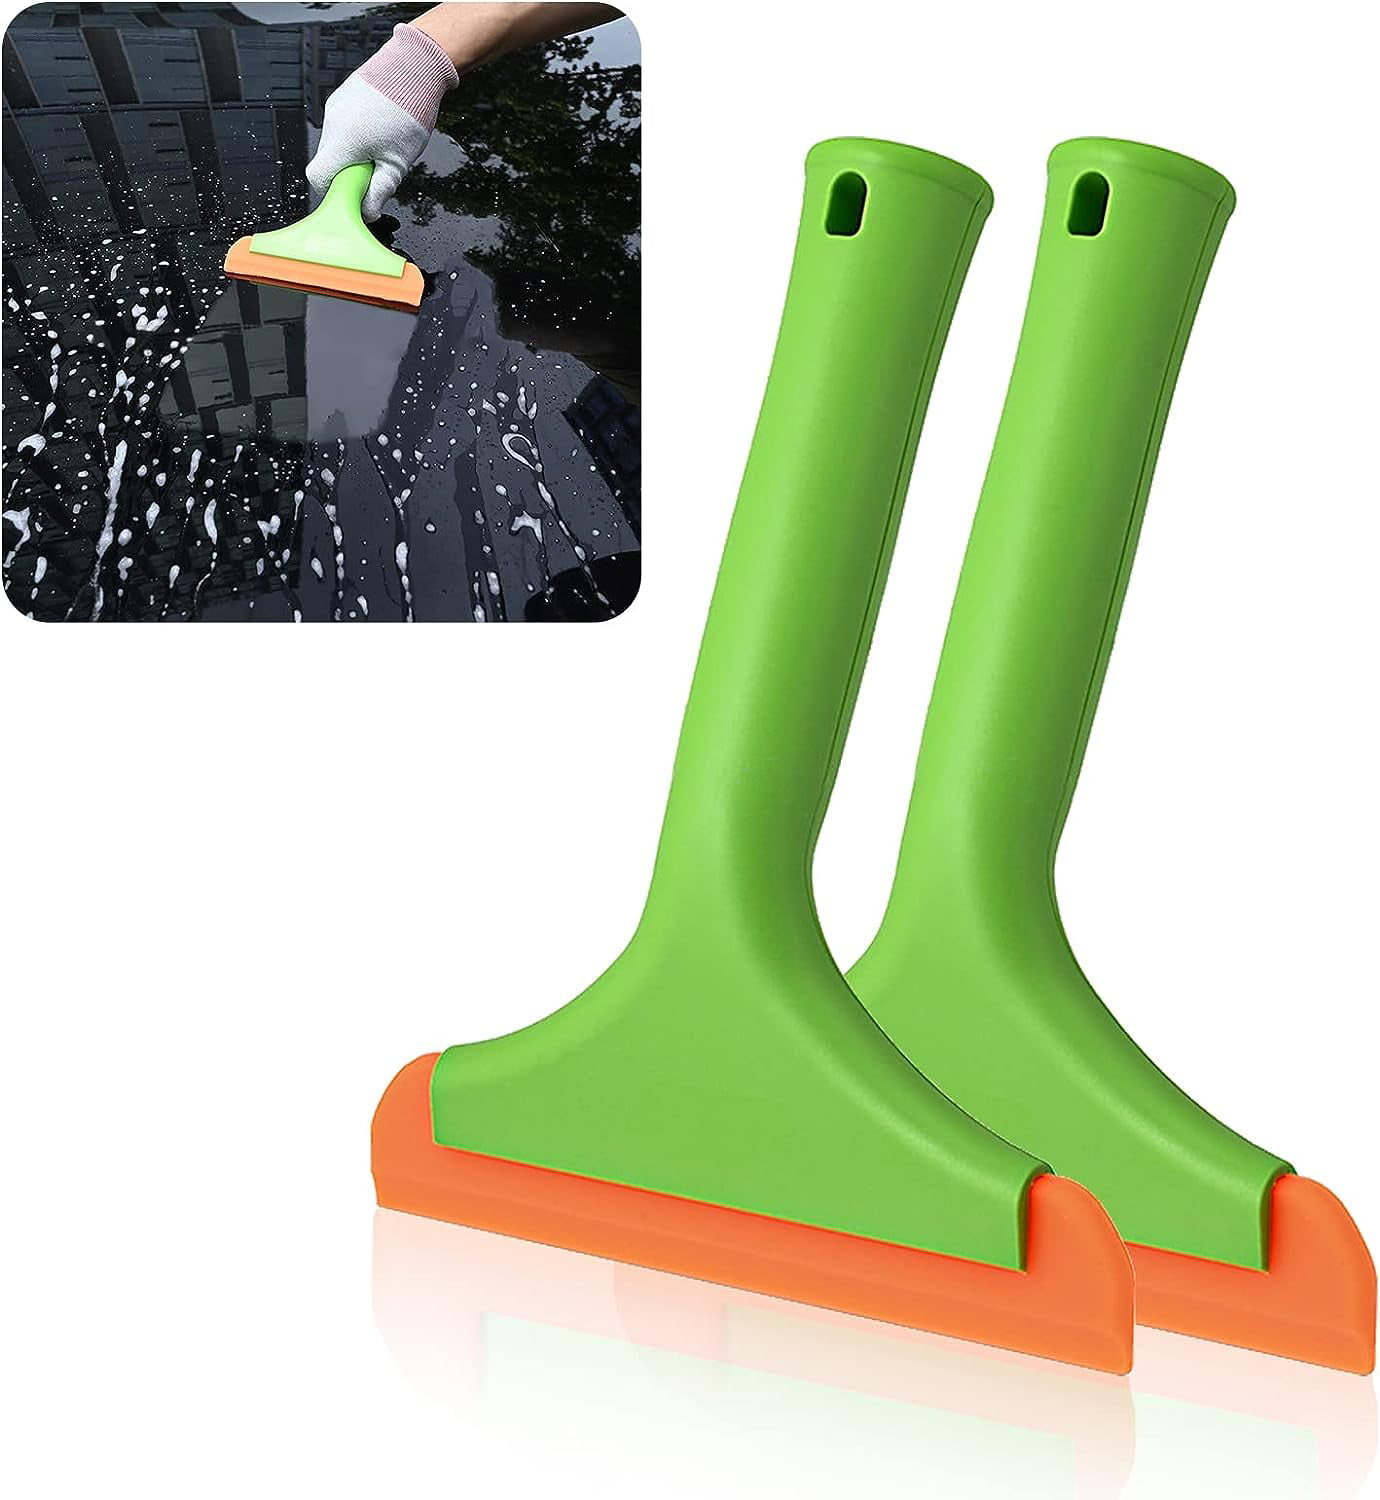 GUGUGI Super Flexible Silicone Squeegee, Auto Water Blade, Water Wiper,  Shower Squeegee, 5.9'' Blade and 7.5